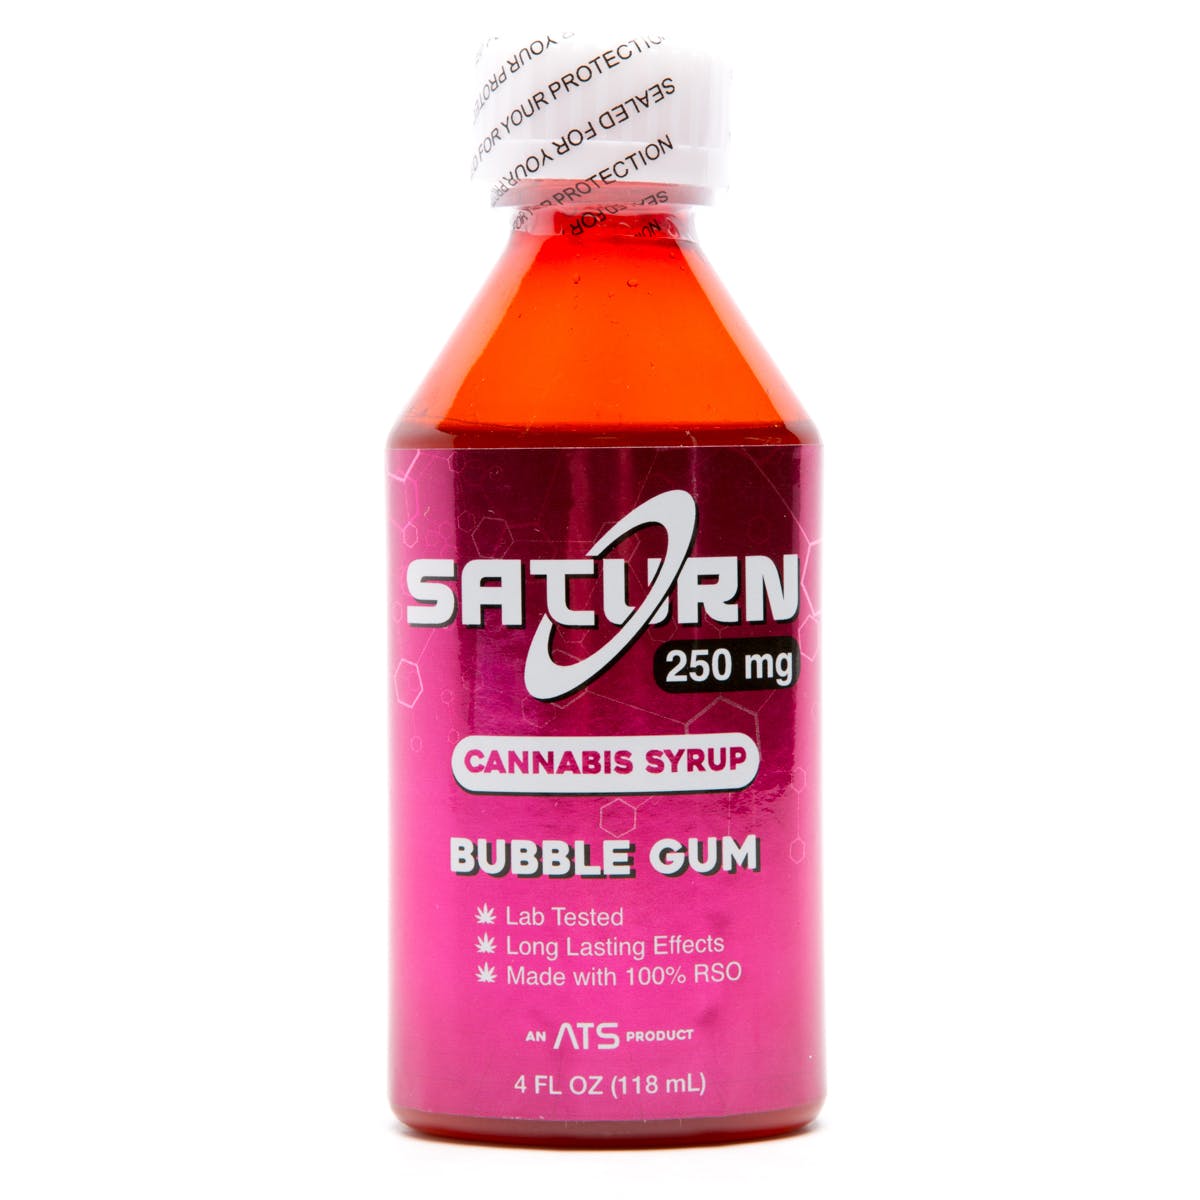 Bubble Gum Cananbis Syrup, 250mg